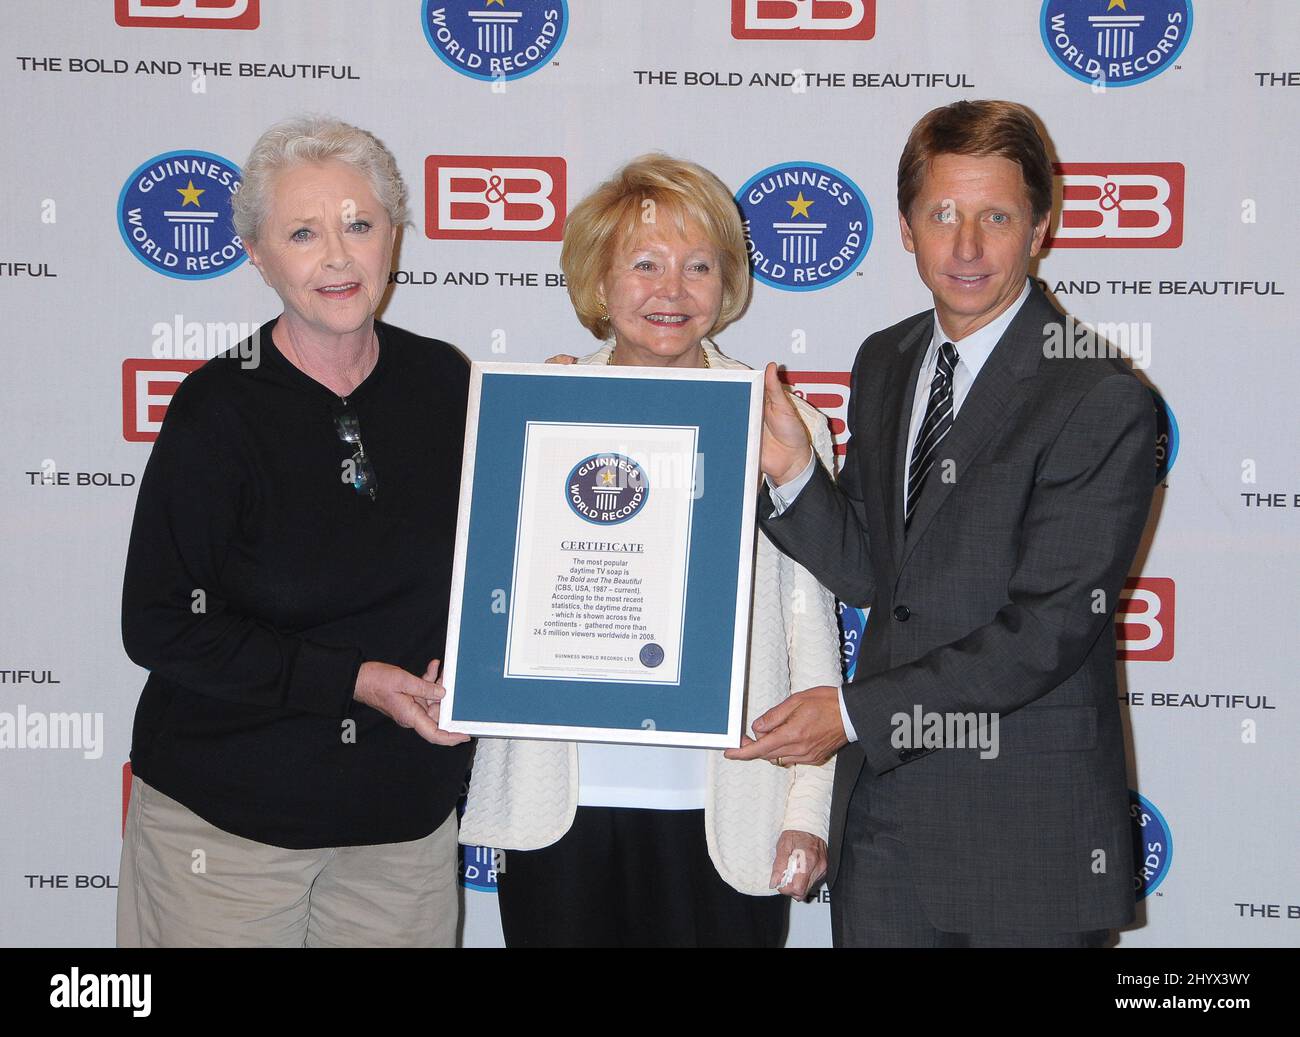 Susan Flannery, Lee Phillip Bell and Bradley Bell during Guinness World Records announcement of 'The Bold and the Beautiful' as most popular daytime TV soap on stage 31 at CBS Television City, Los Angeles Stock Photo